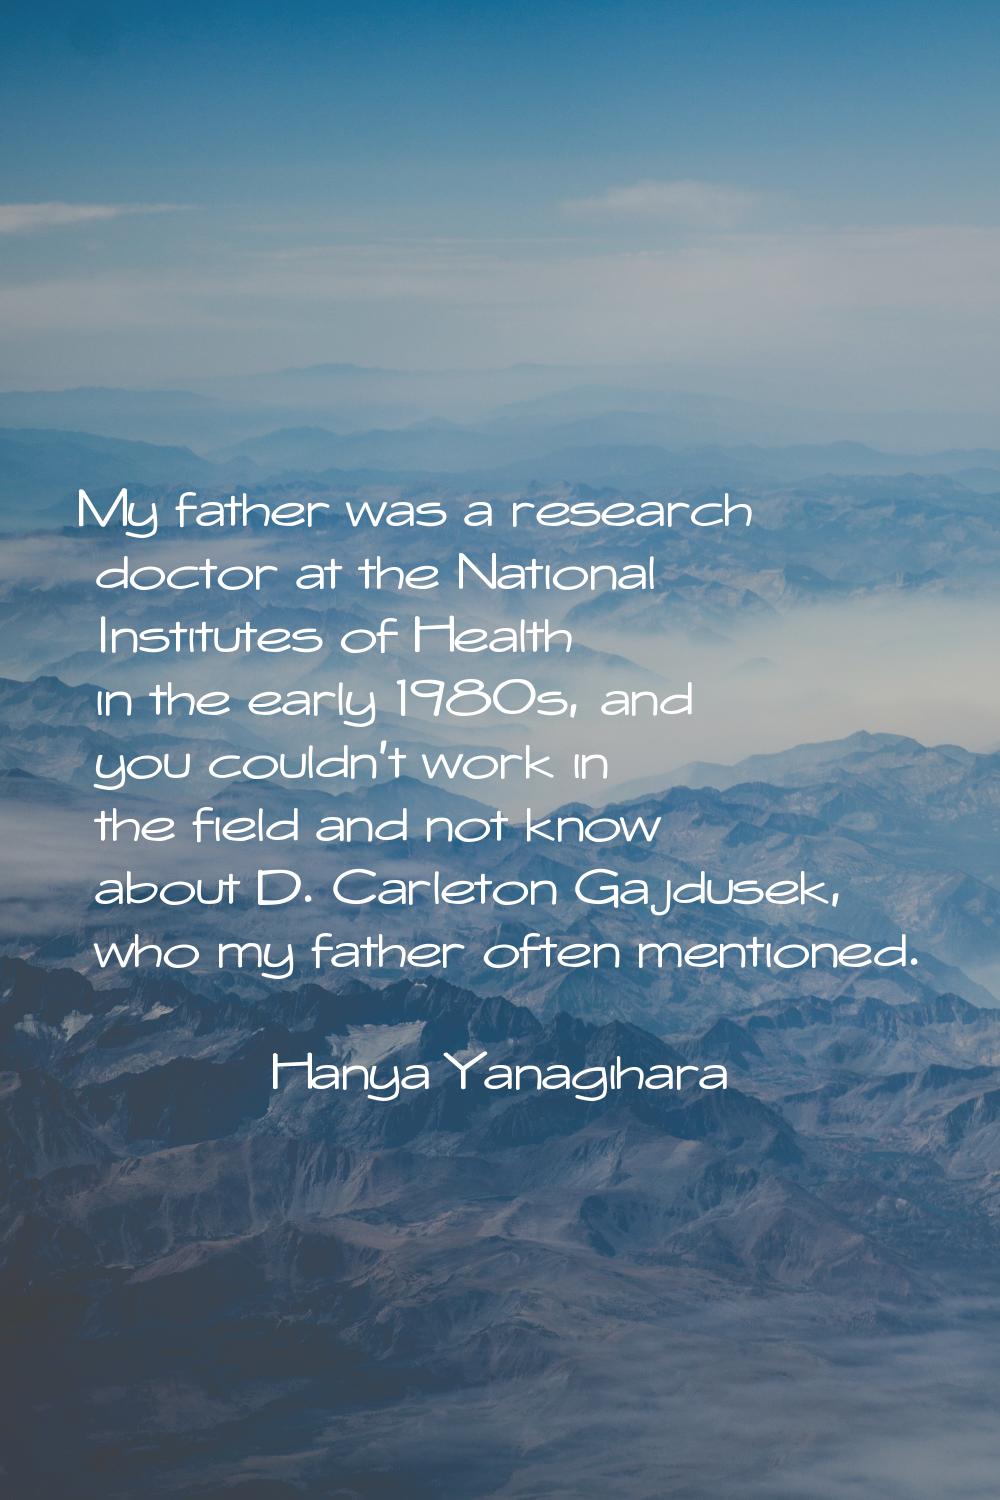 My father was a research doctor at the National Institutes of Health in the early 1980s, and you co